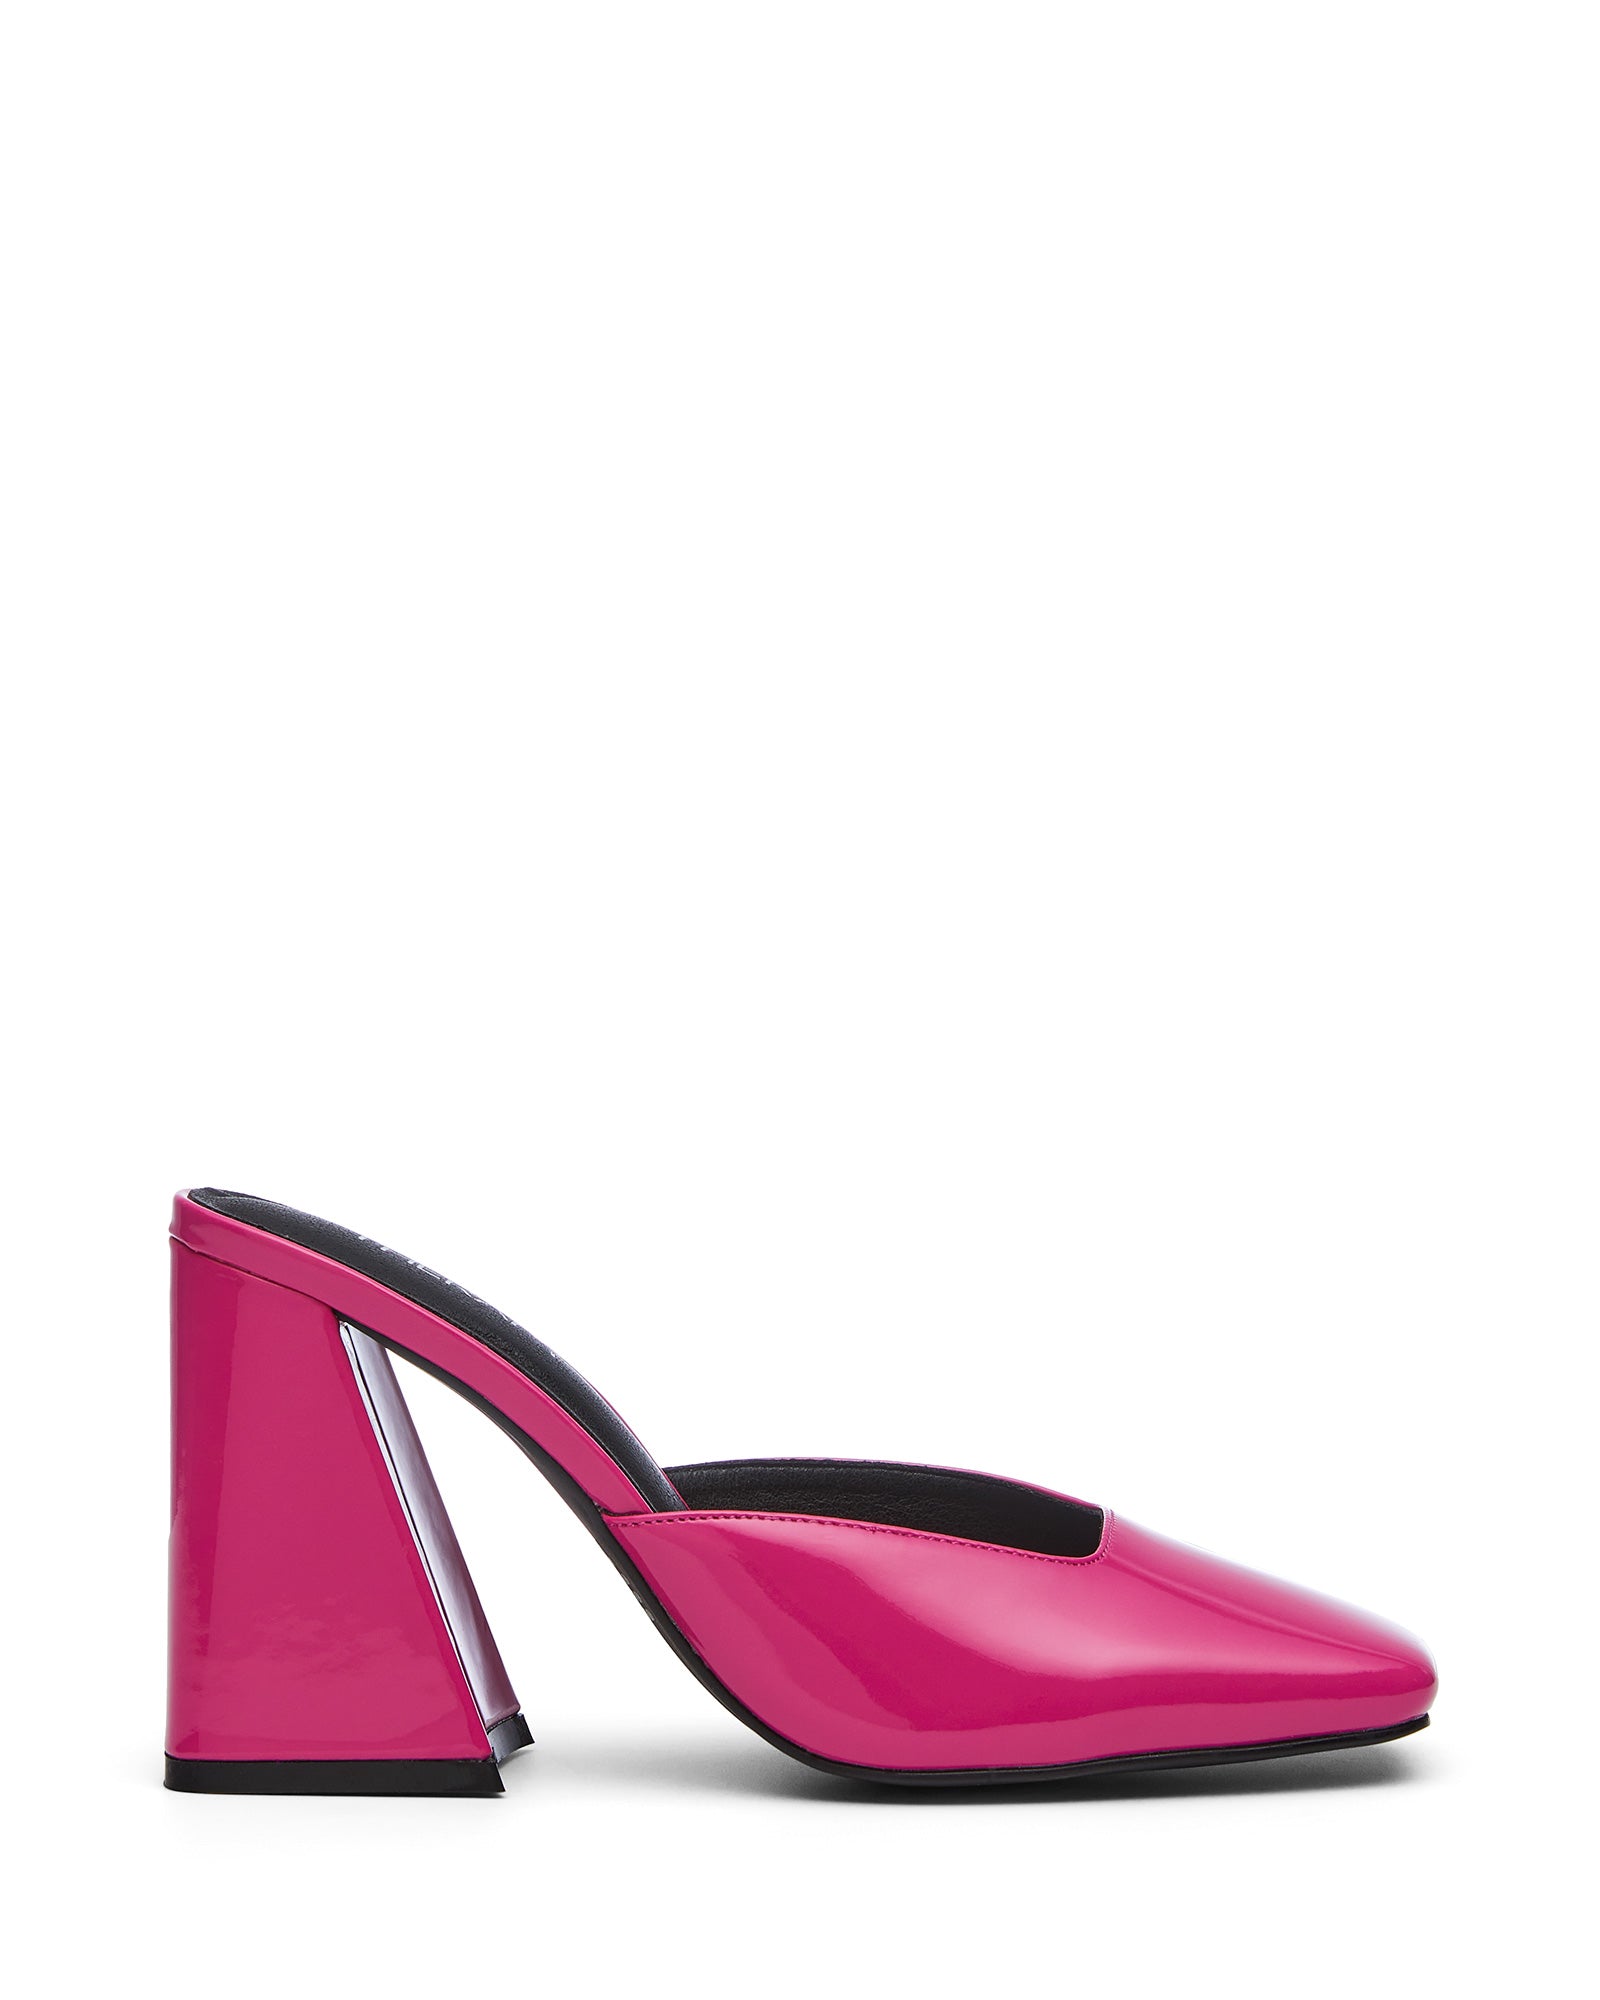 Therapy Shoes Unmatched Pink Patent | Women's Heels | Mule | Block Heel